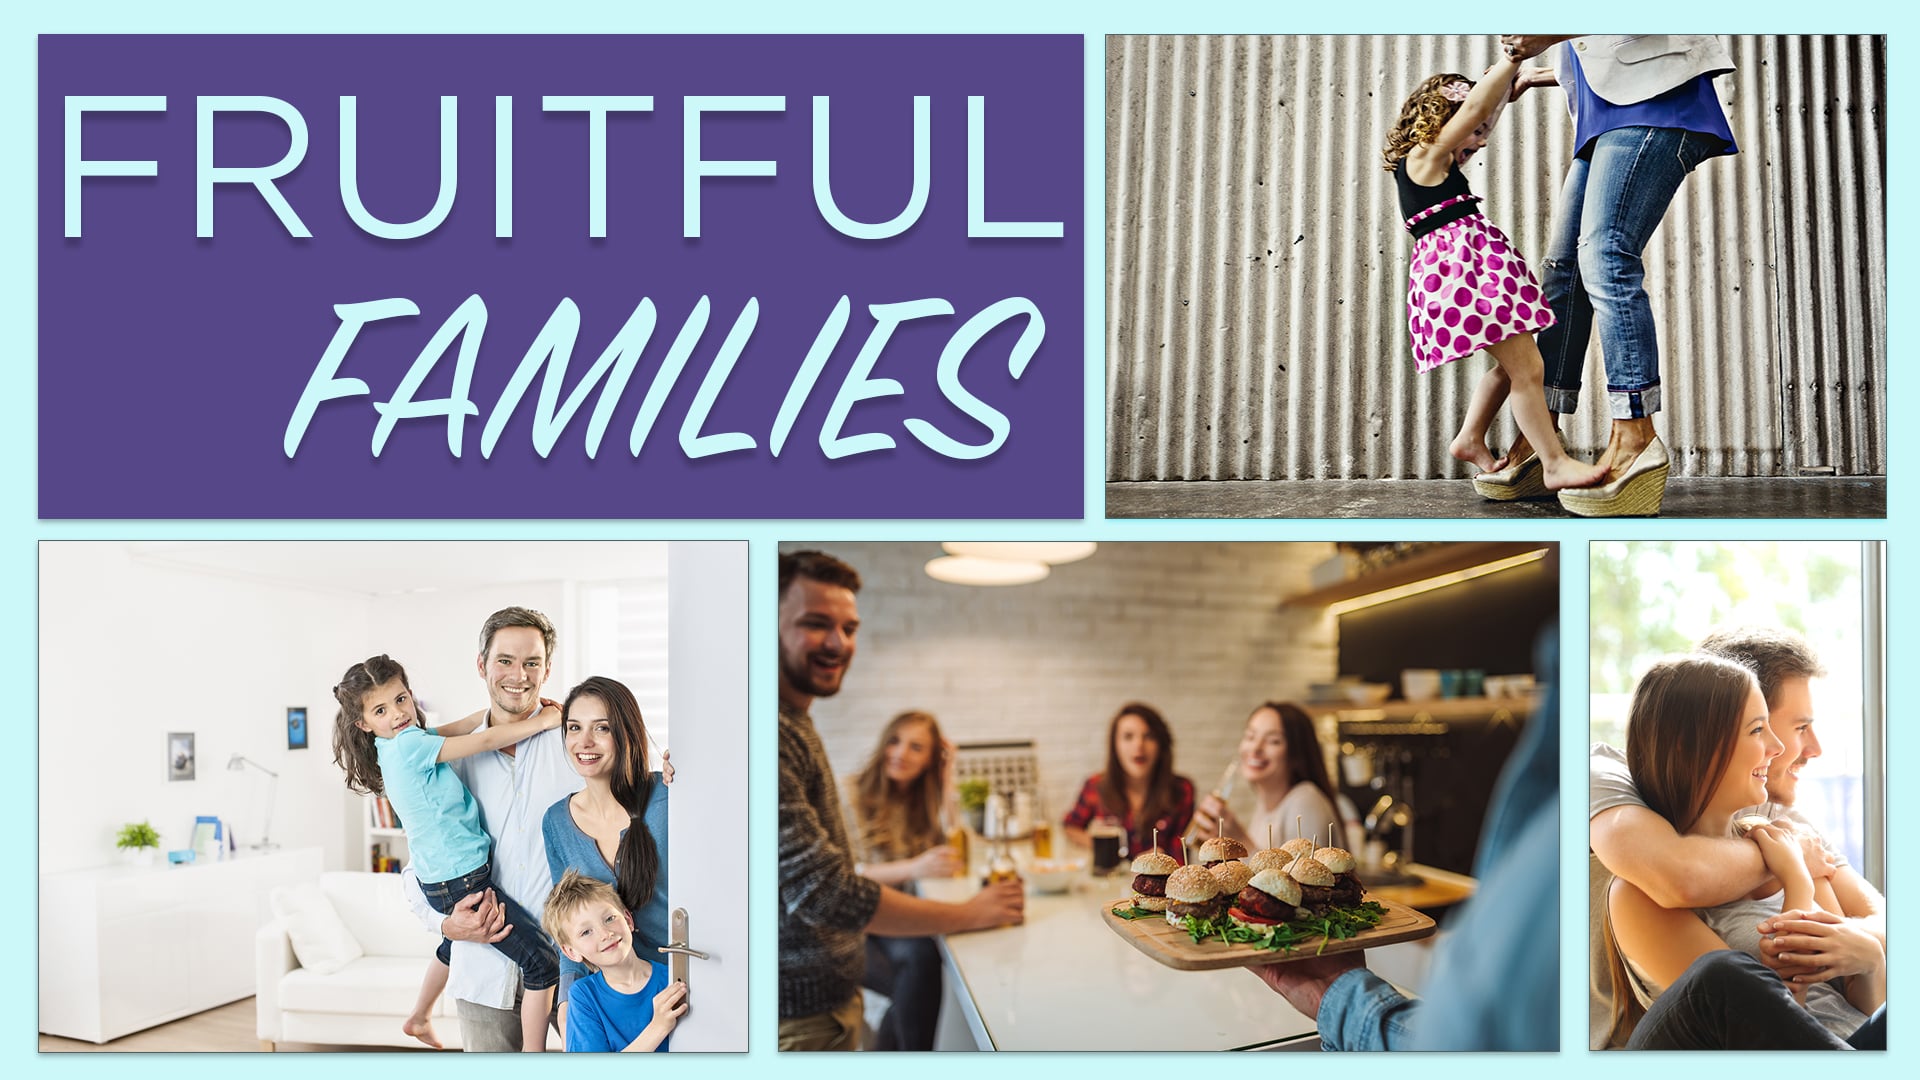 Fruitful families - Mothers